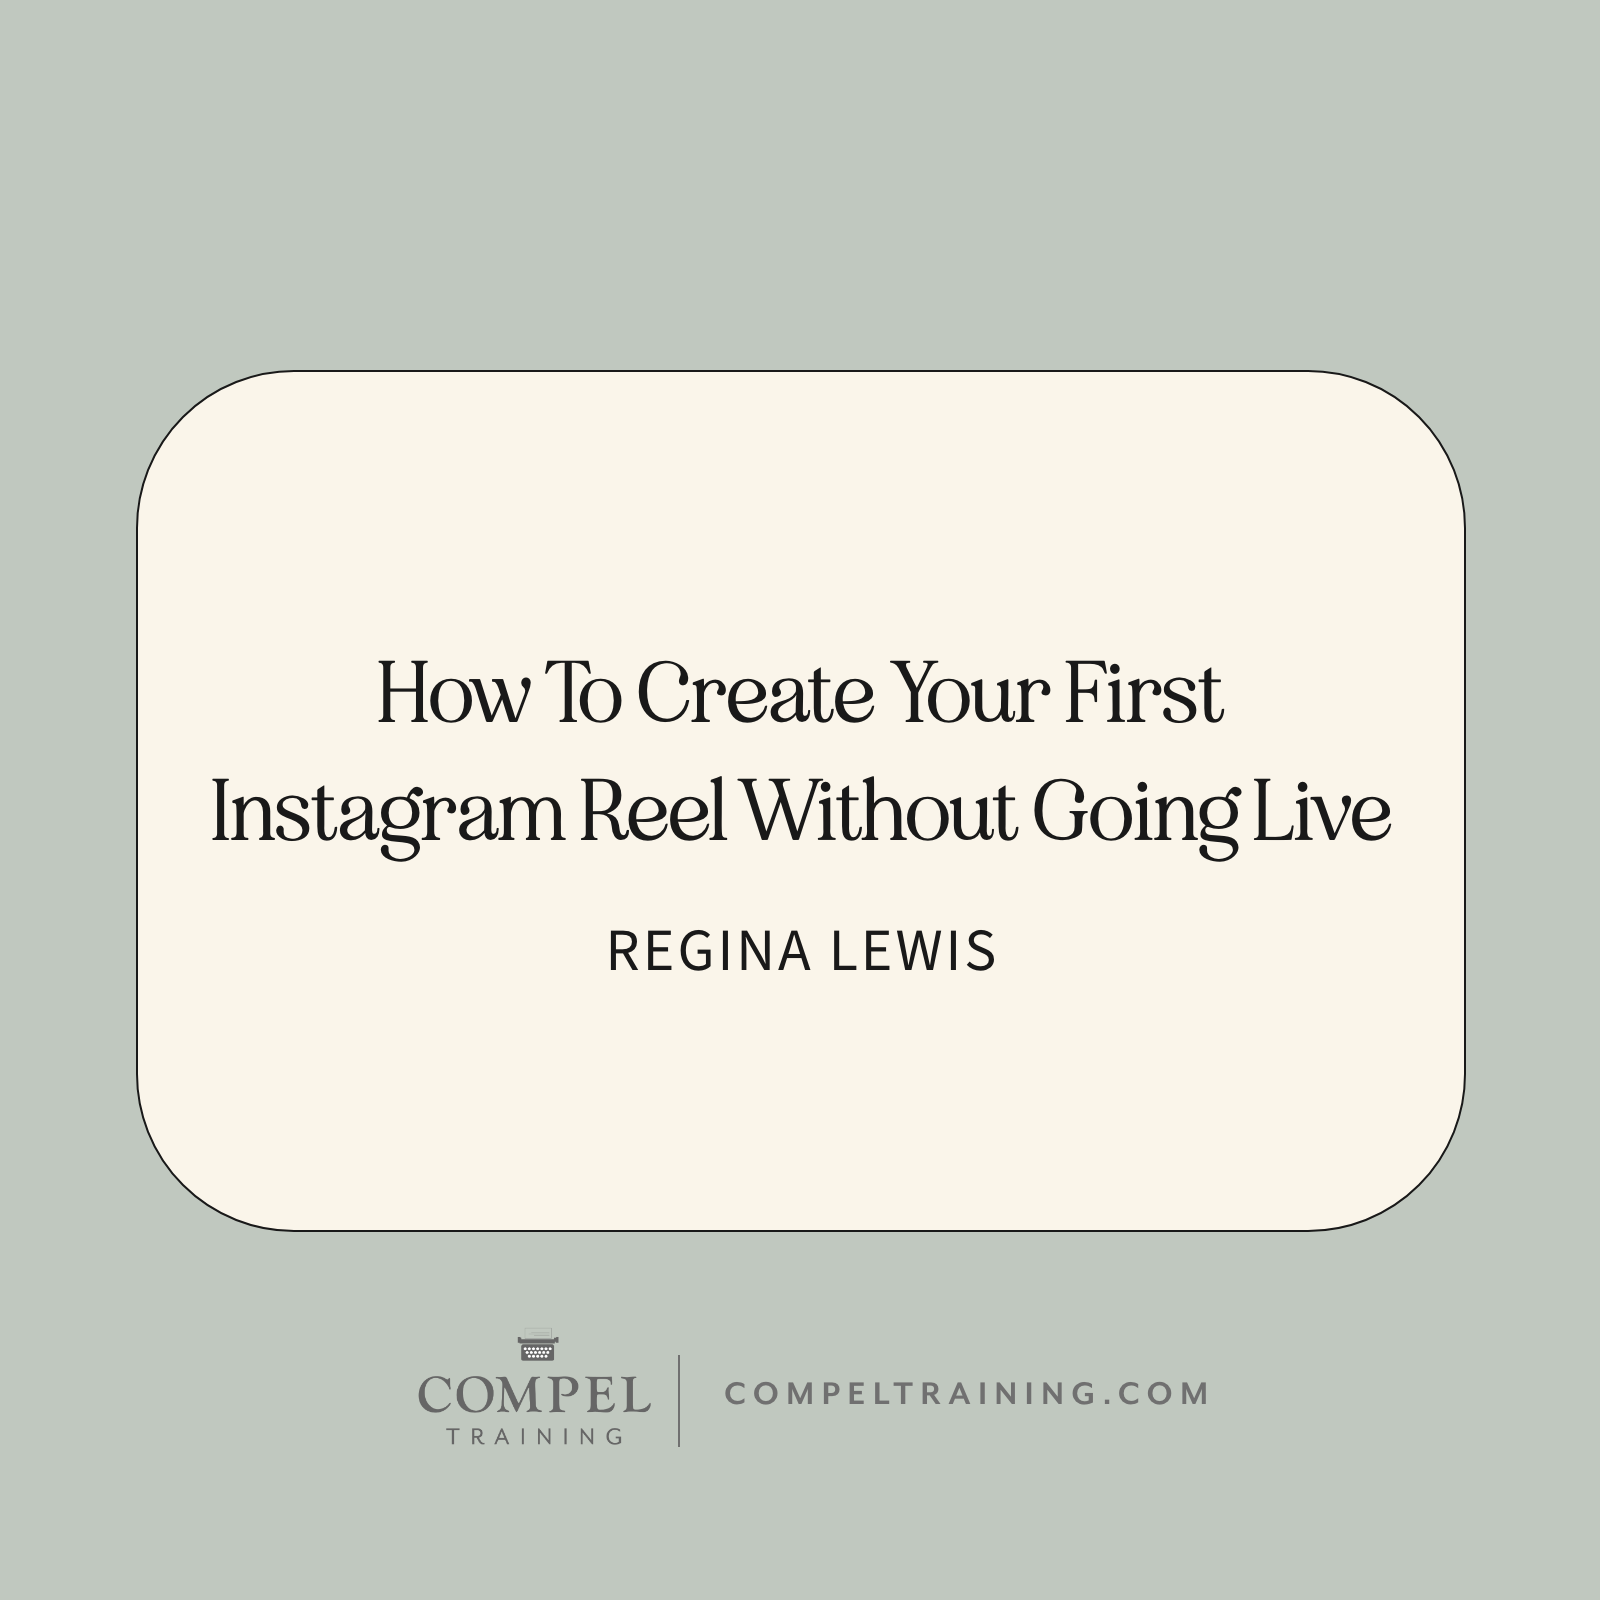 Raise your hand if you feel like the world of Instagram is changing and evolving before you can catch up? Just when we figured out how to do a Story, now we have ... Reels?! If your head is spinning and you don’t know what a Reel is, this blog is for you. Click below if you want to learn what a Reel is, how to make one, and why they’re a great way to grow your Instagram.